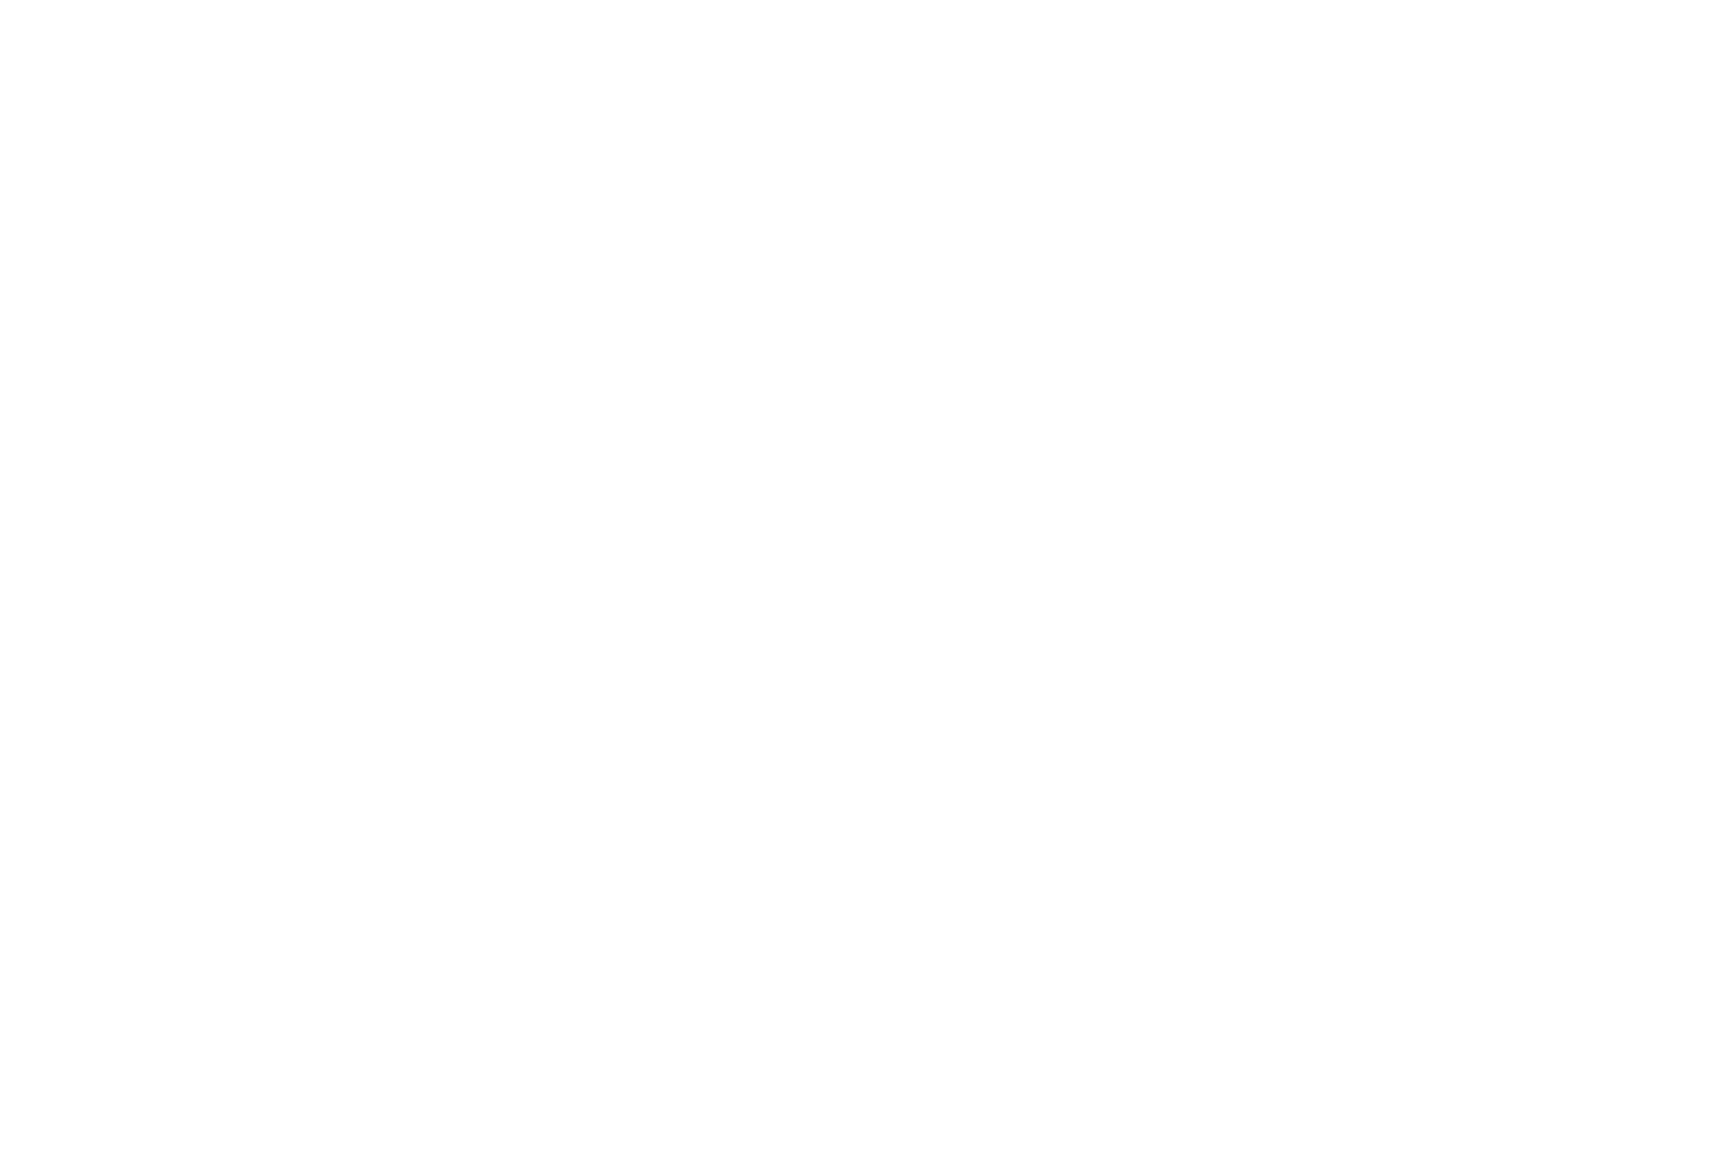 OFFICIAL SELECTION - West Europe International Film Festival - Brussels Edition - 2019.png